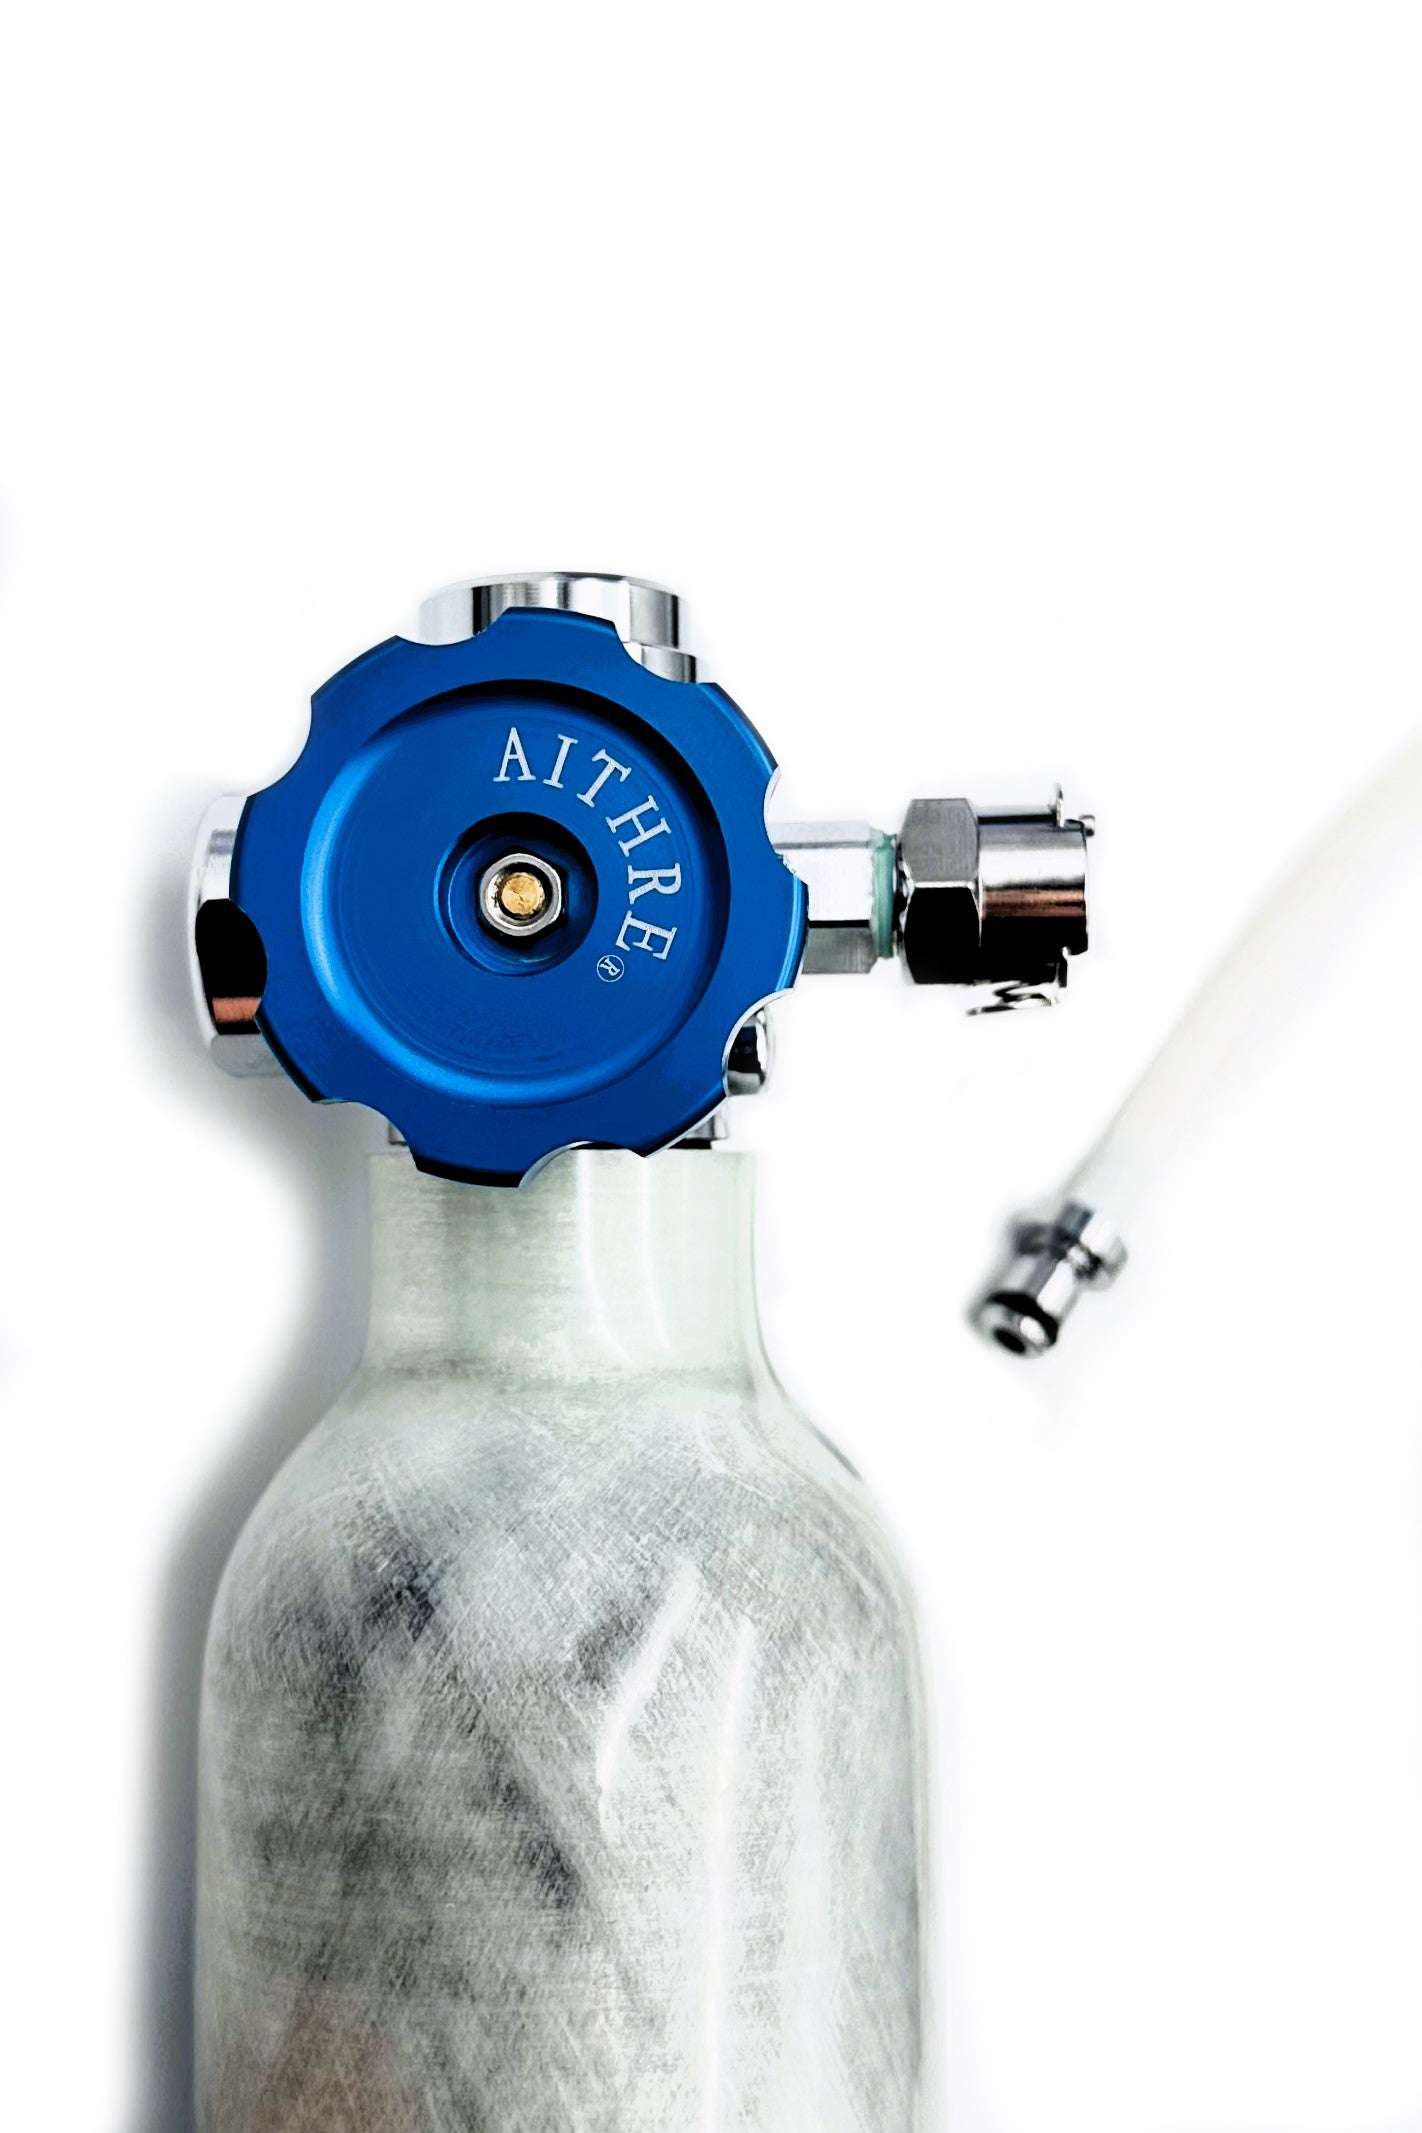 47L Bottle with Fixed Flow Regulator